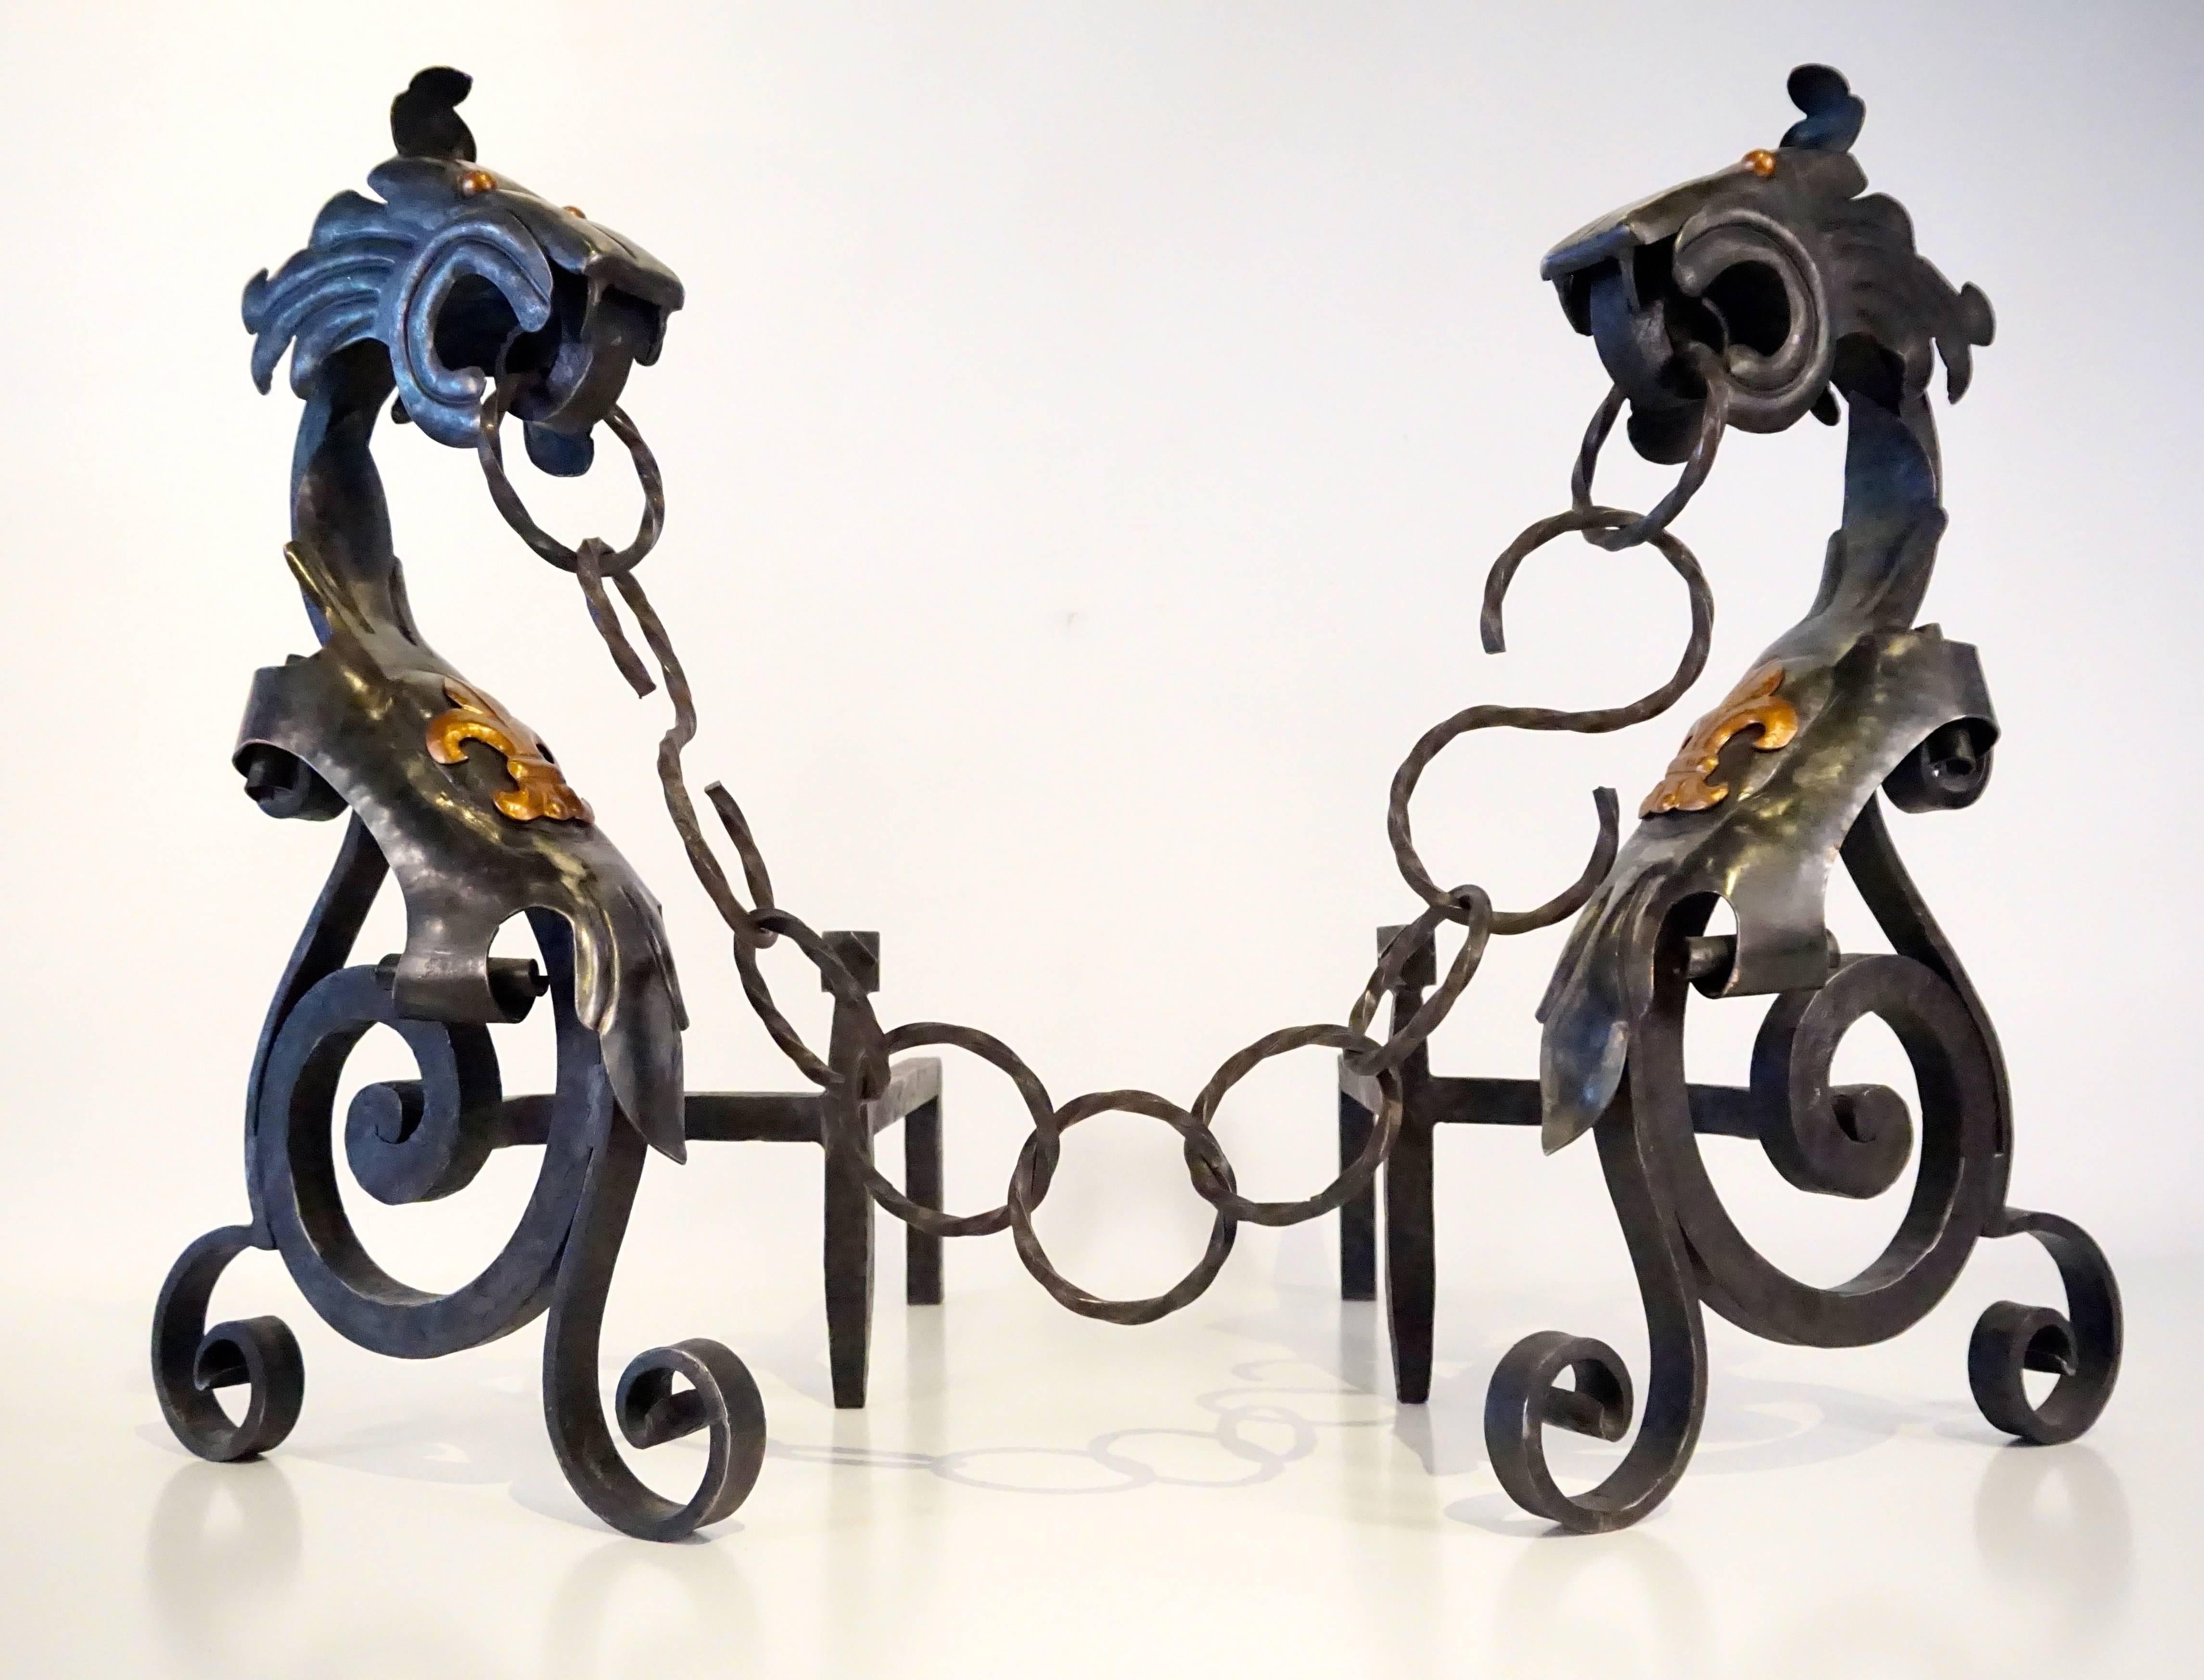 A fabulous pair of French medieval style hand wrought andirons. This pair has a wonderful large scale presence. The chain links are twisted iron and the dragon heads are particularly well rendered. These are in amazing condition.
Dimensions shown